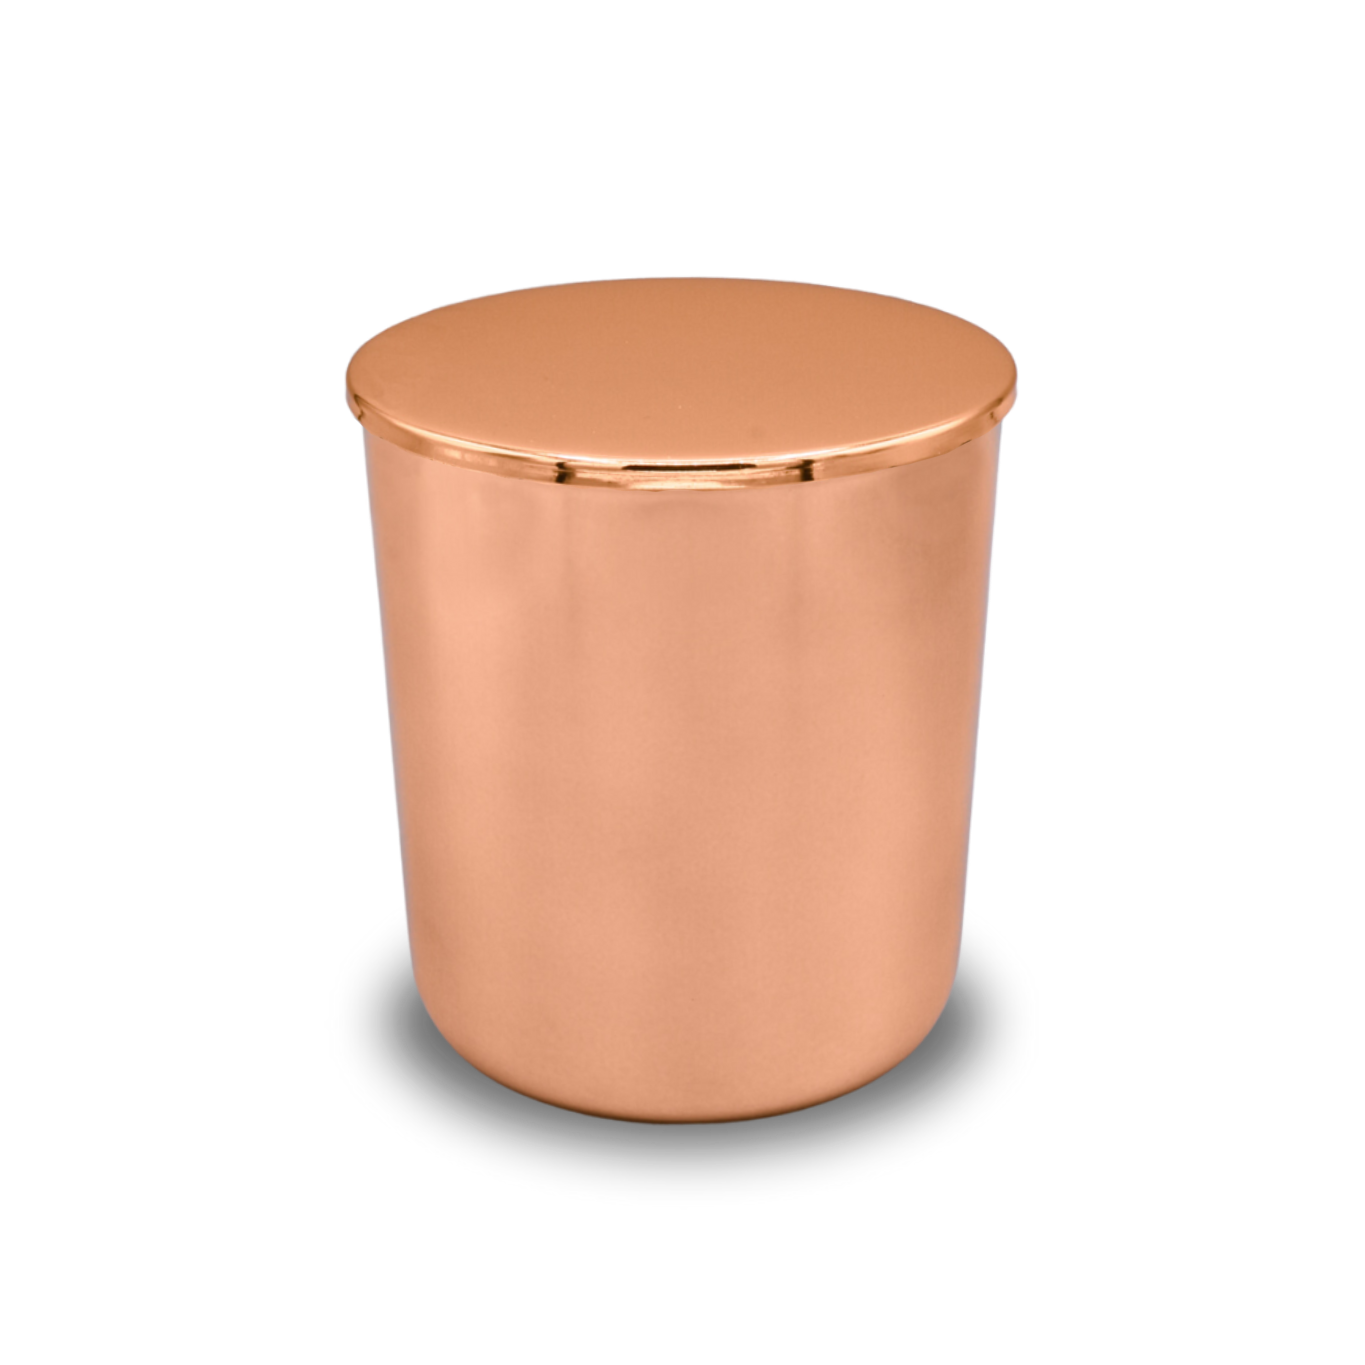 Halo - Glamour Copper w/ Wooden Wick & Lid (14oz)